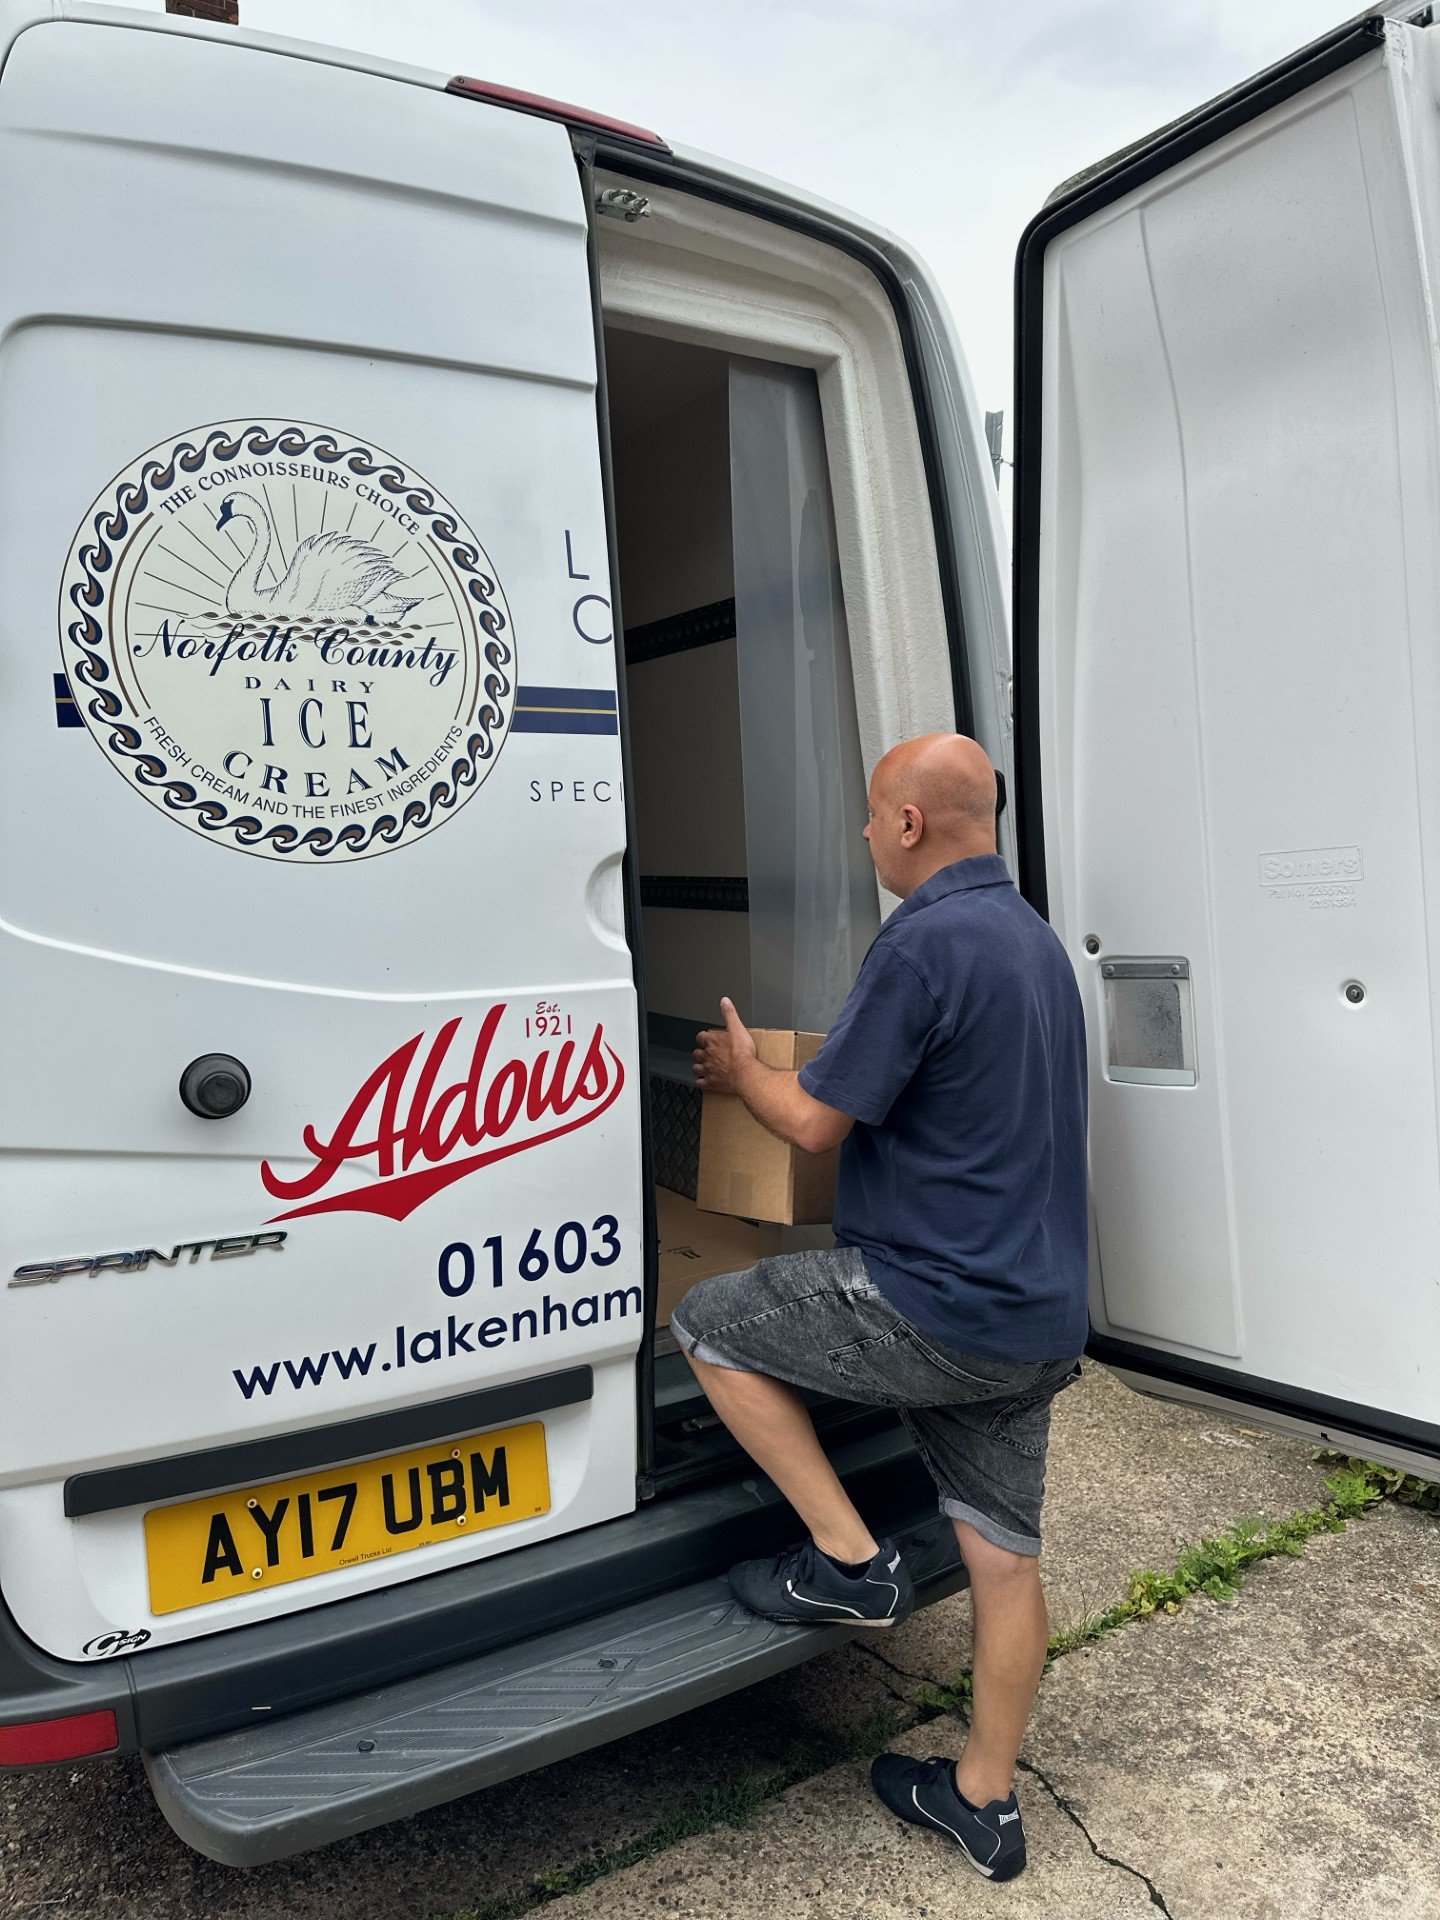 Patrick loading the van with orders